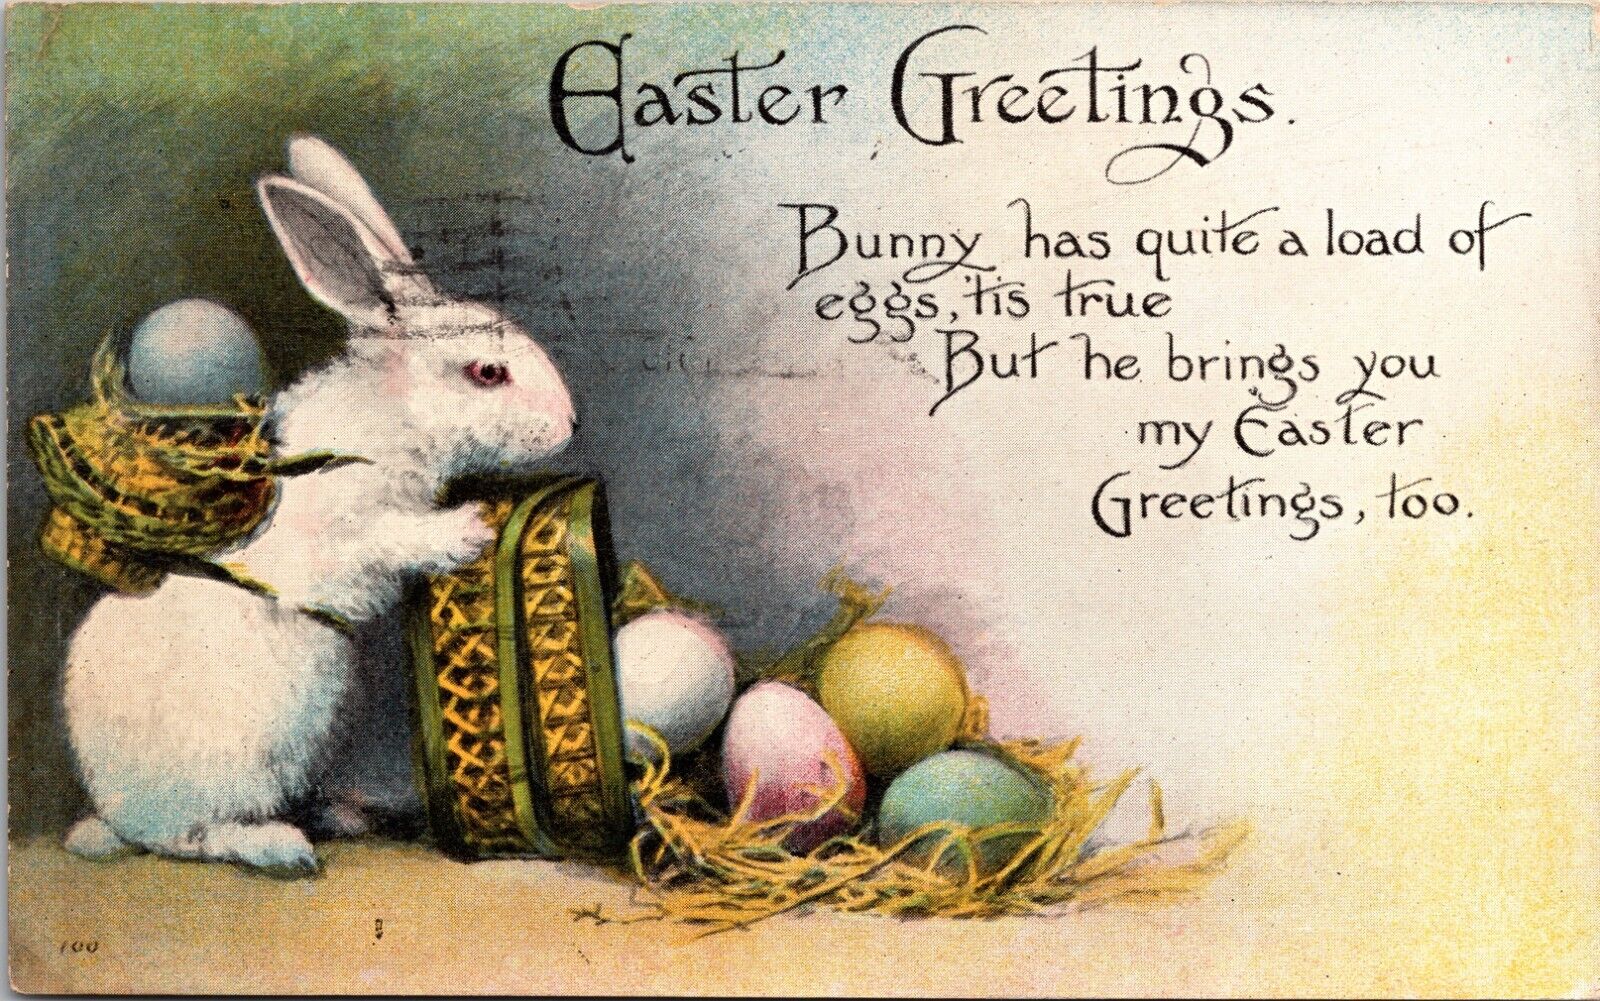 BUNNY HAS QUITE A LOAD OF EGGS-VTG 1916 EASTER POSTCARD *T